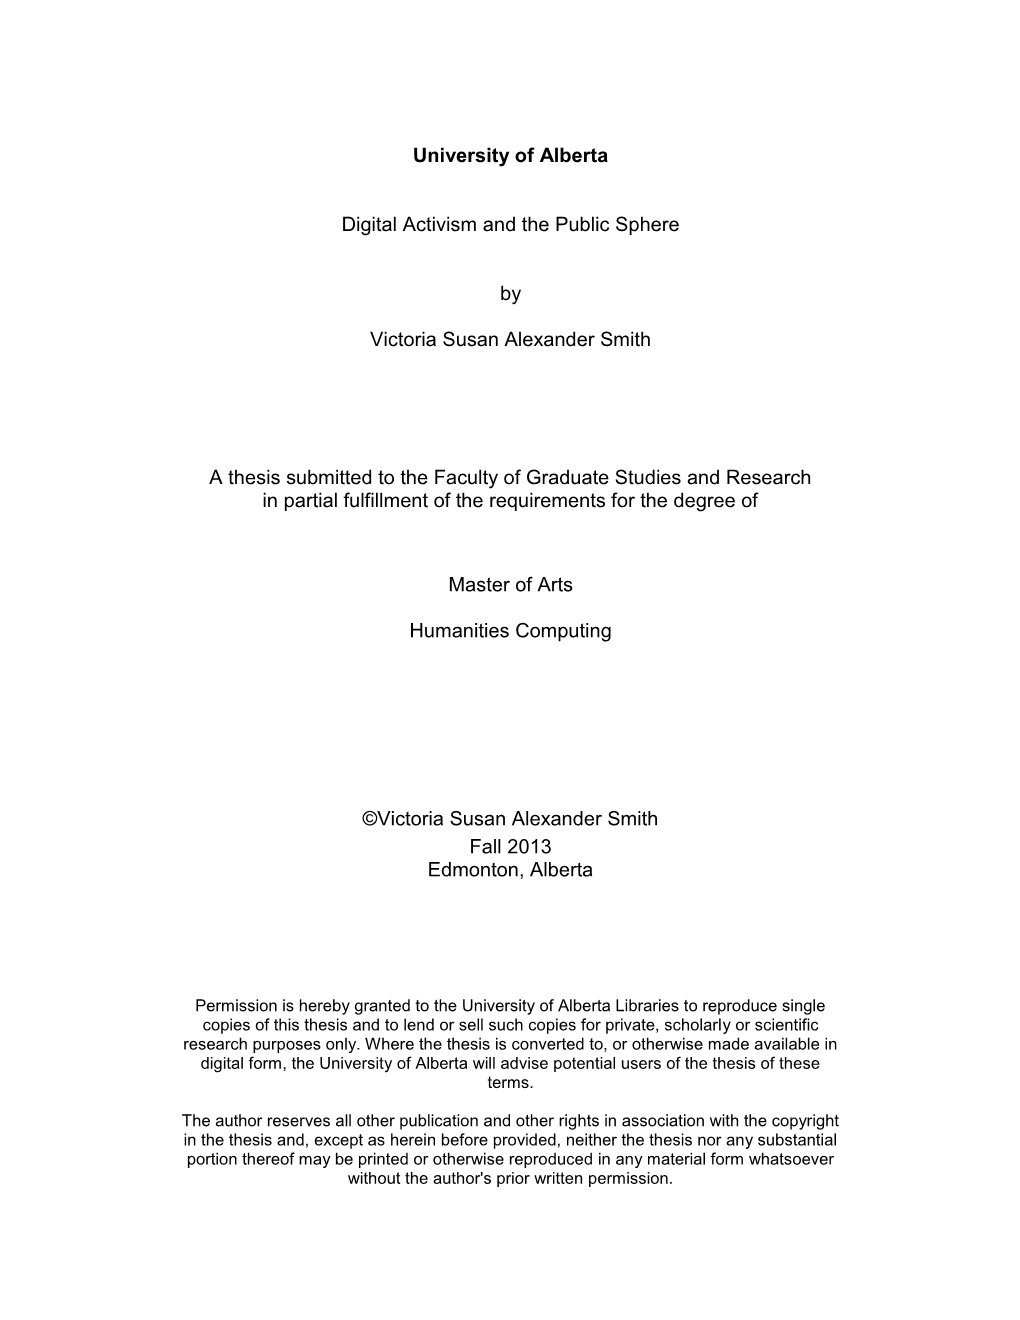 University of Alberta Digital Activism and the Public Sphere by Victoria Susan Alexander Smith a Thesis Submitted to the Faculty